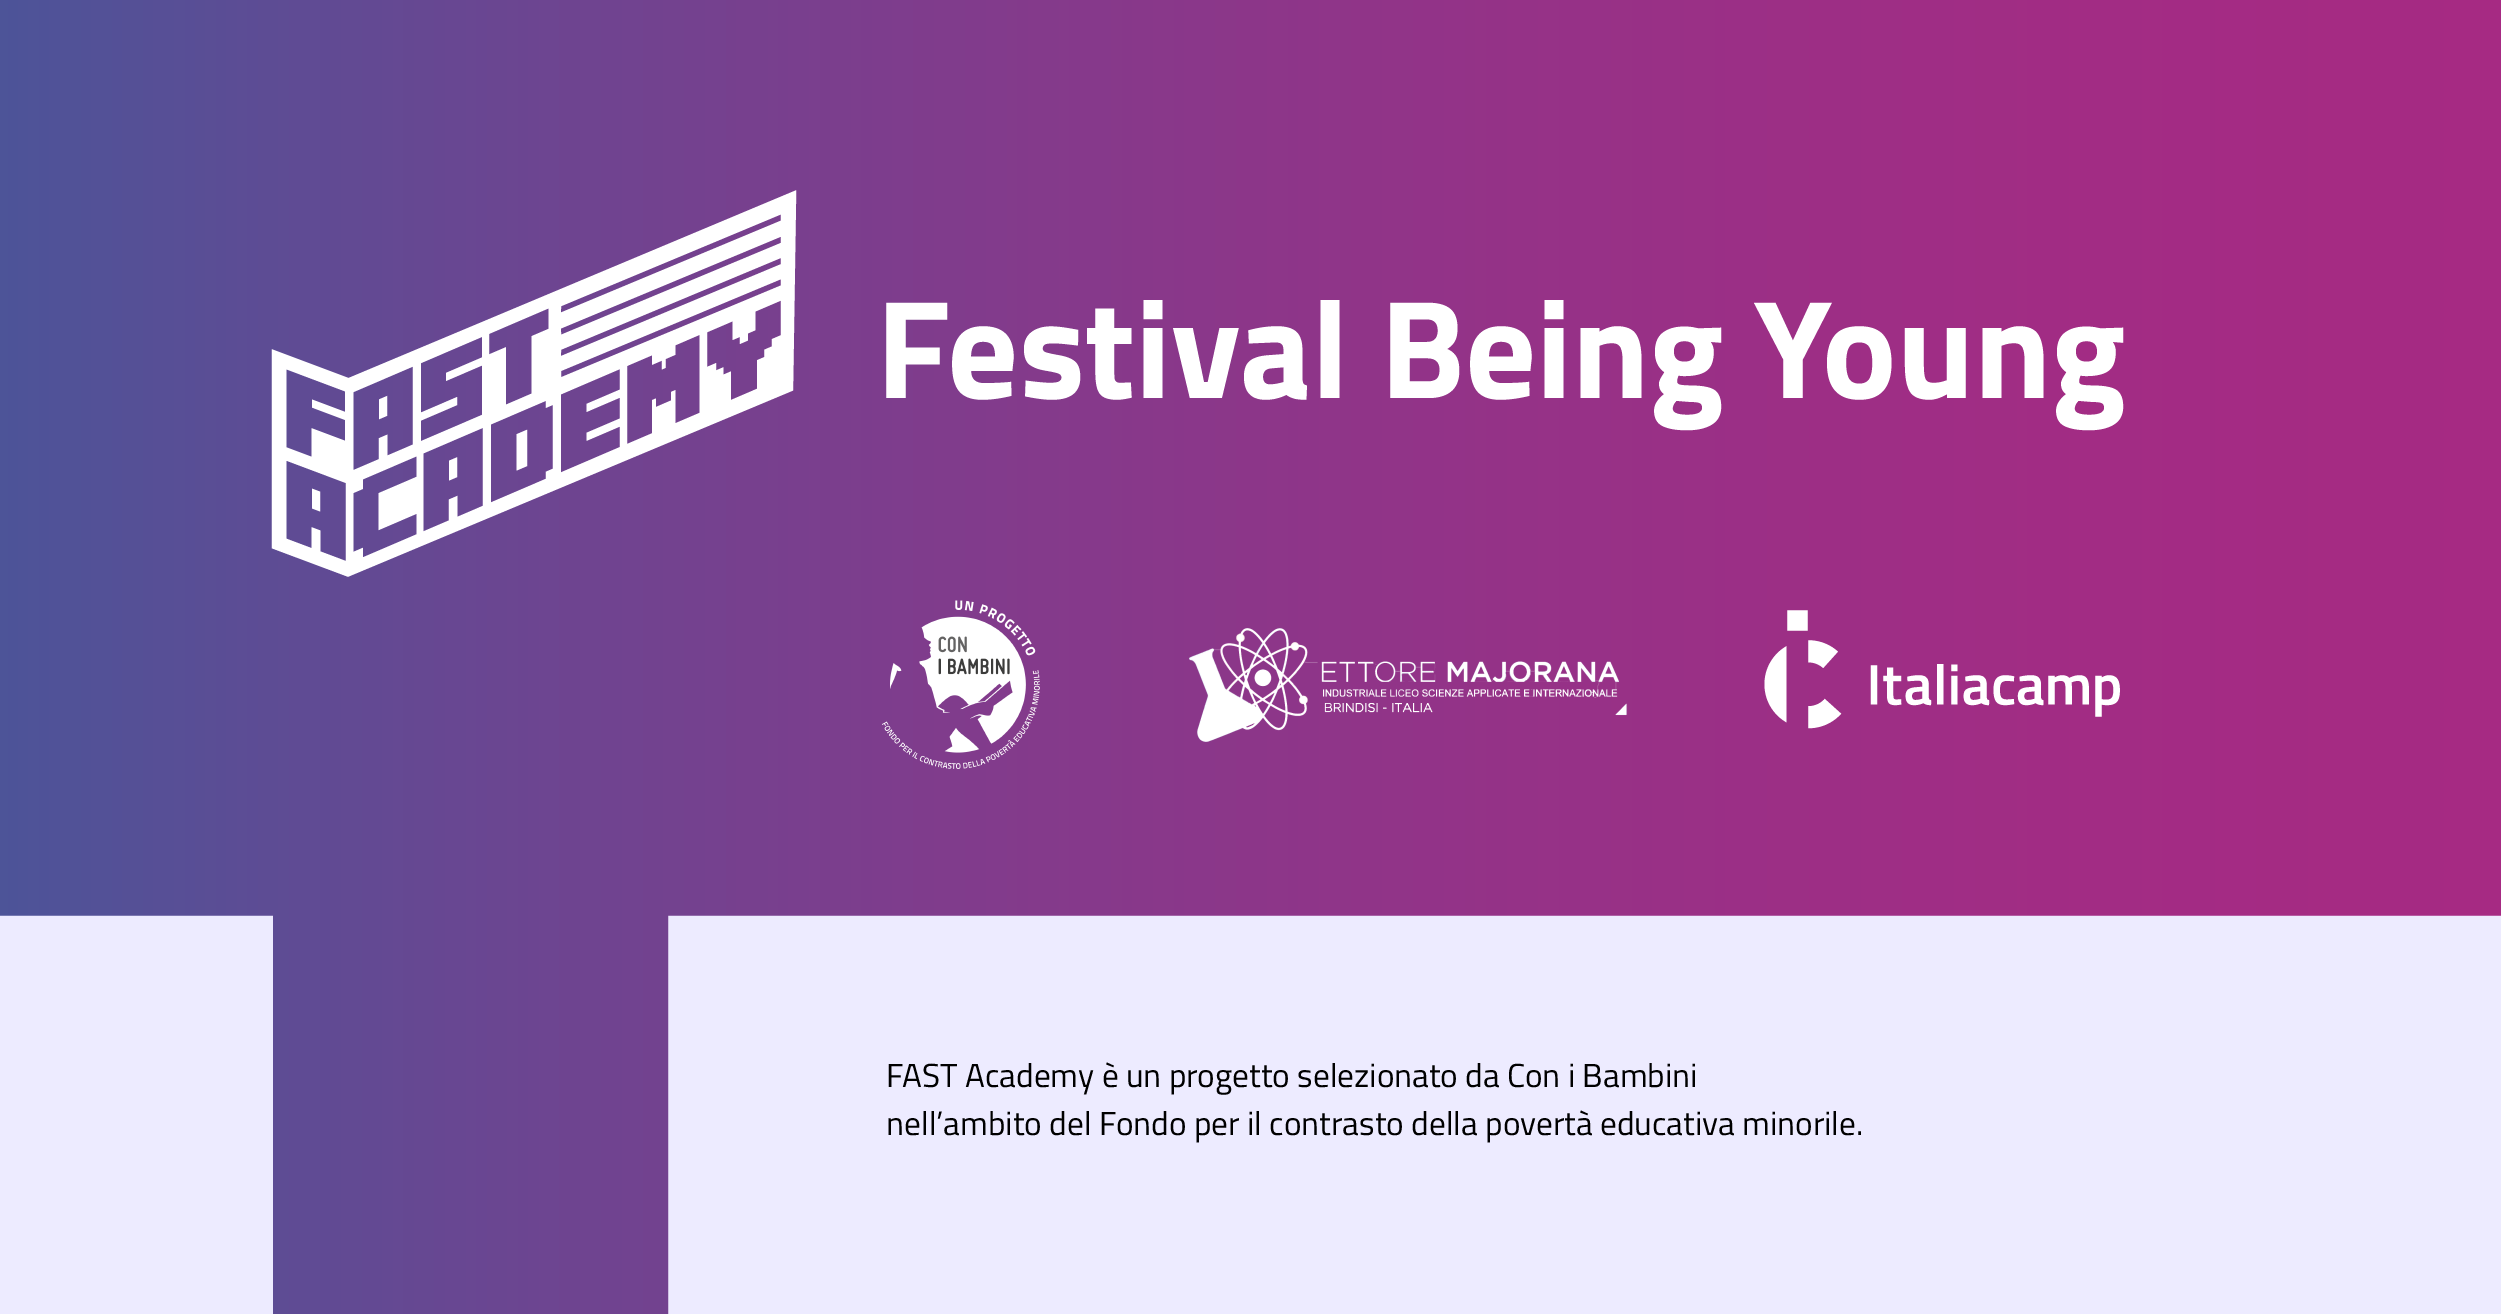 fast academy festival being young